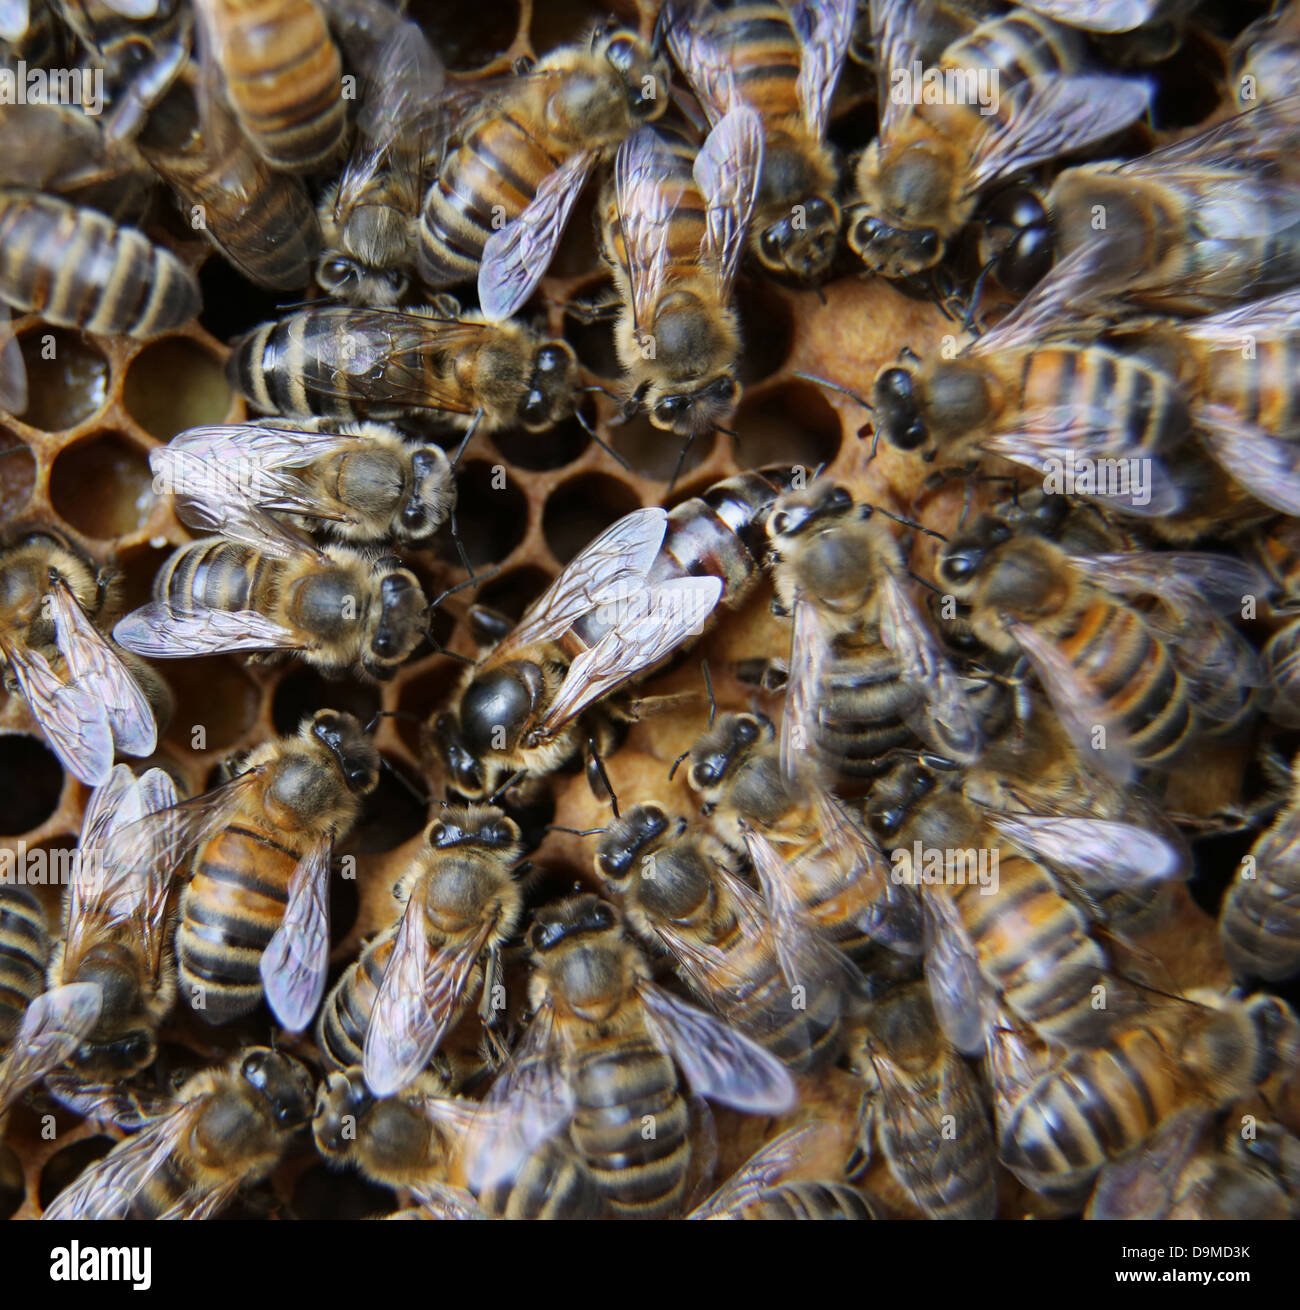 Queen Bee Surrounded by Workers on Frame From Hive Stock Photo